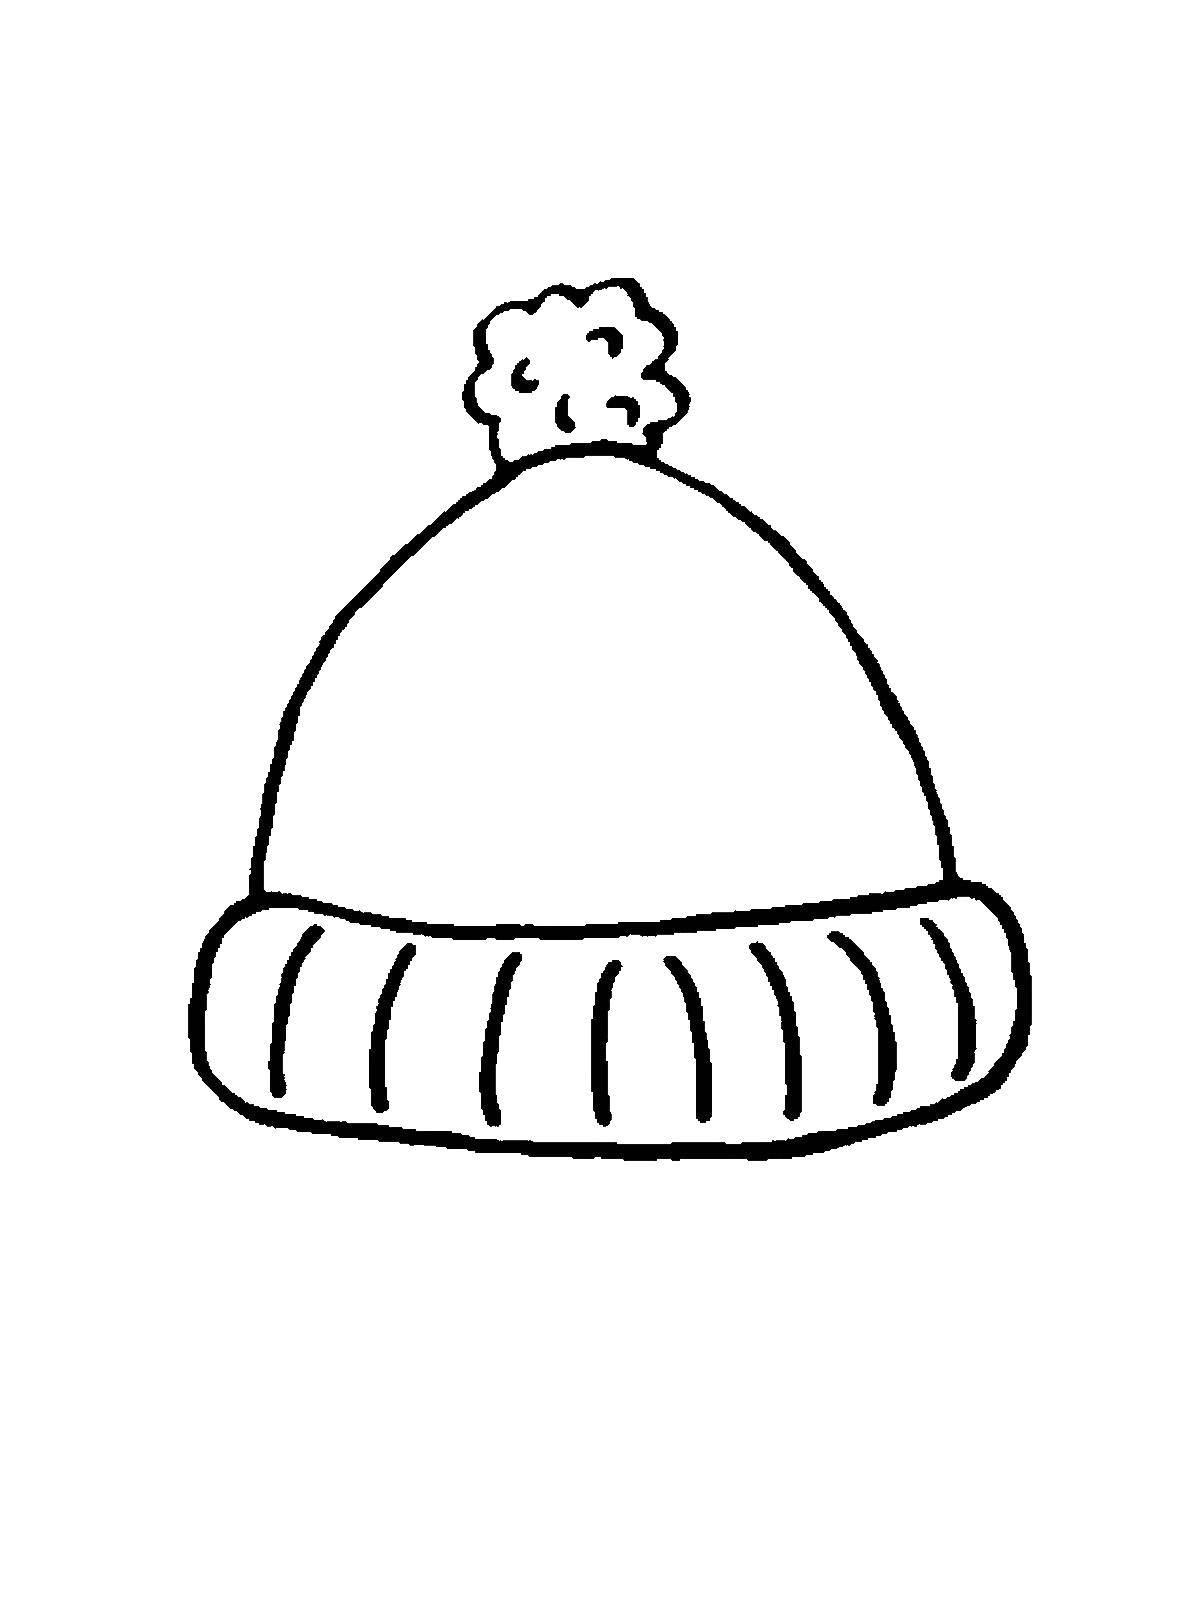 Coloring Winter hat with bells. Category clothing. Tags:  Clothes, winter hat.